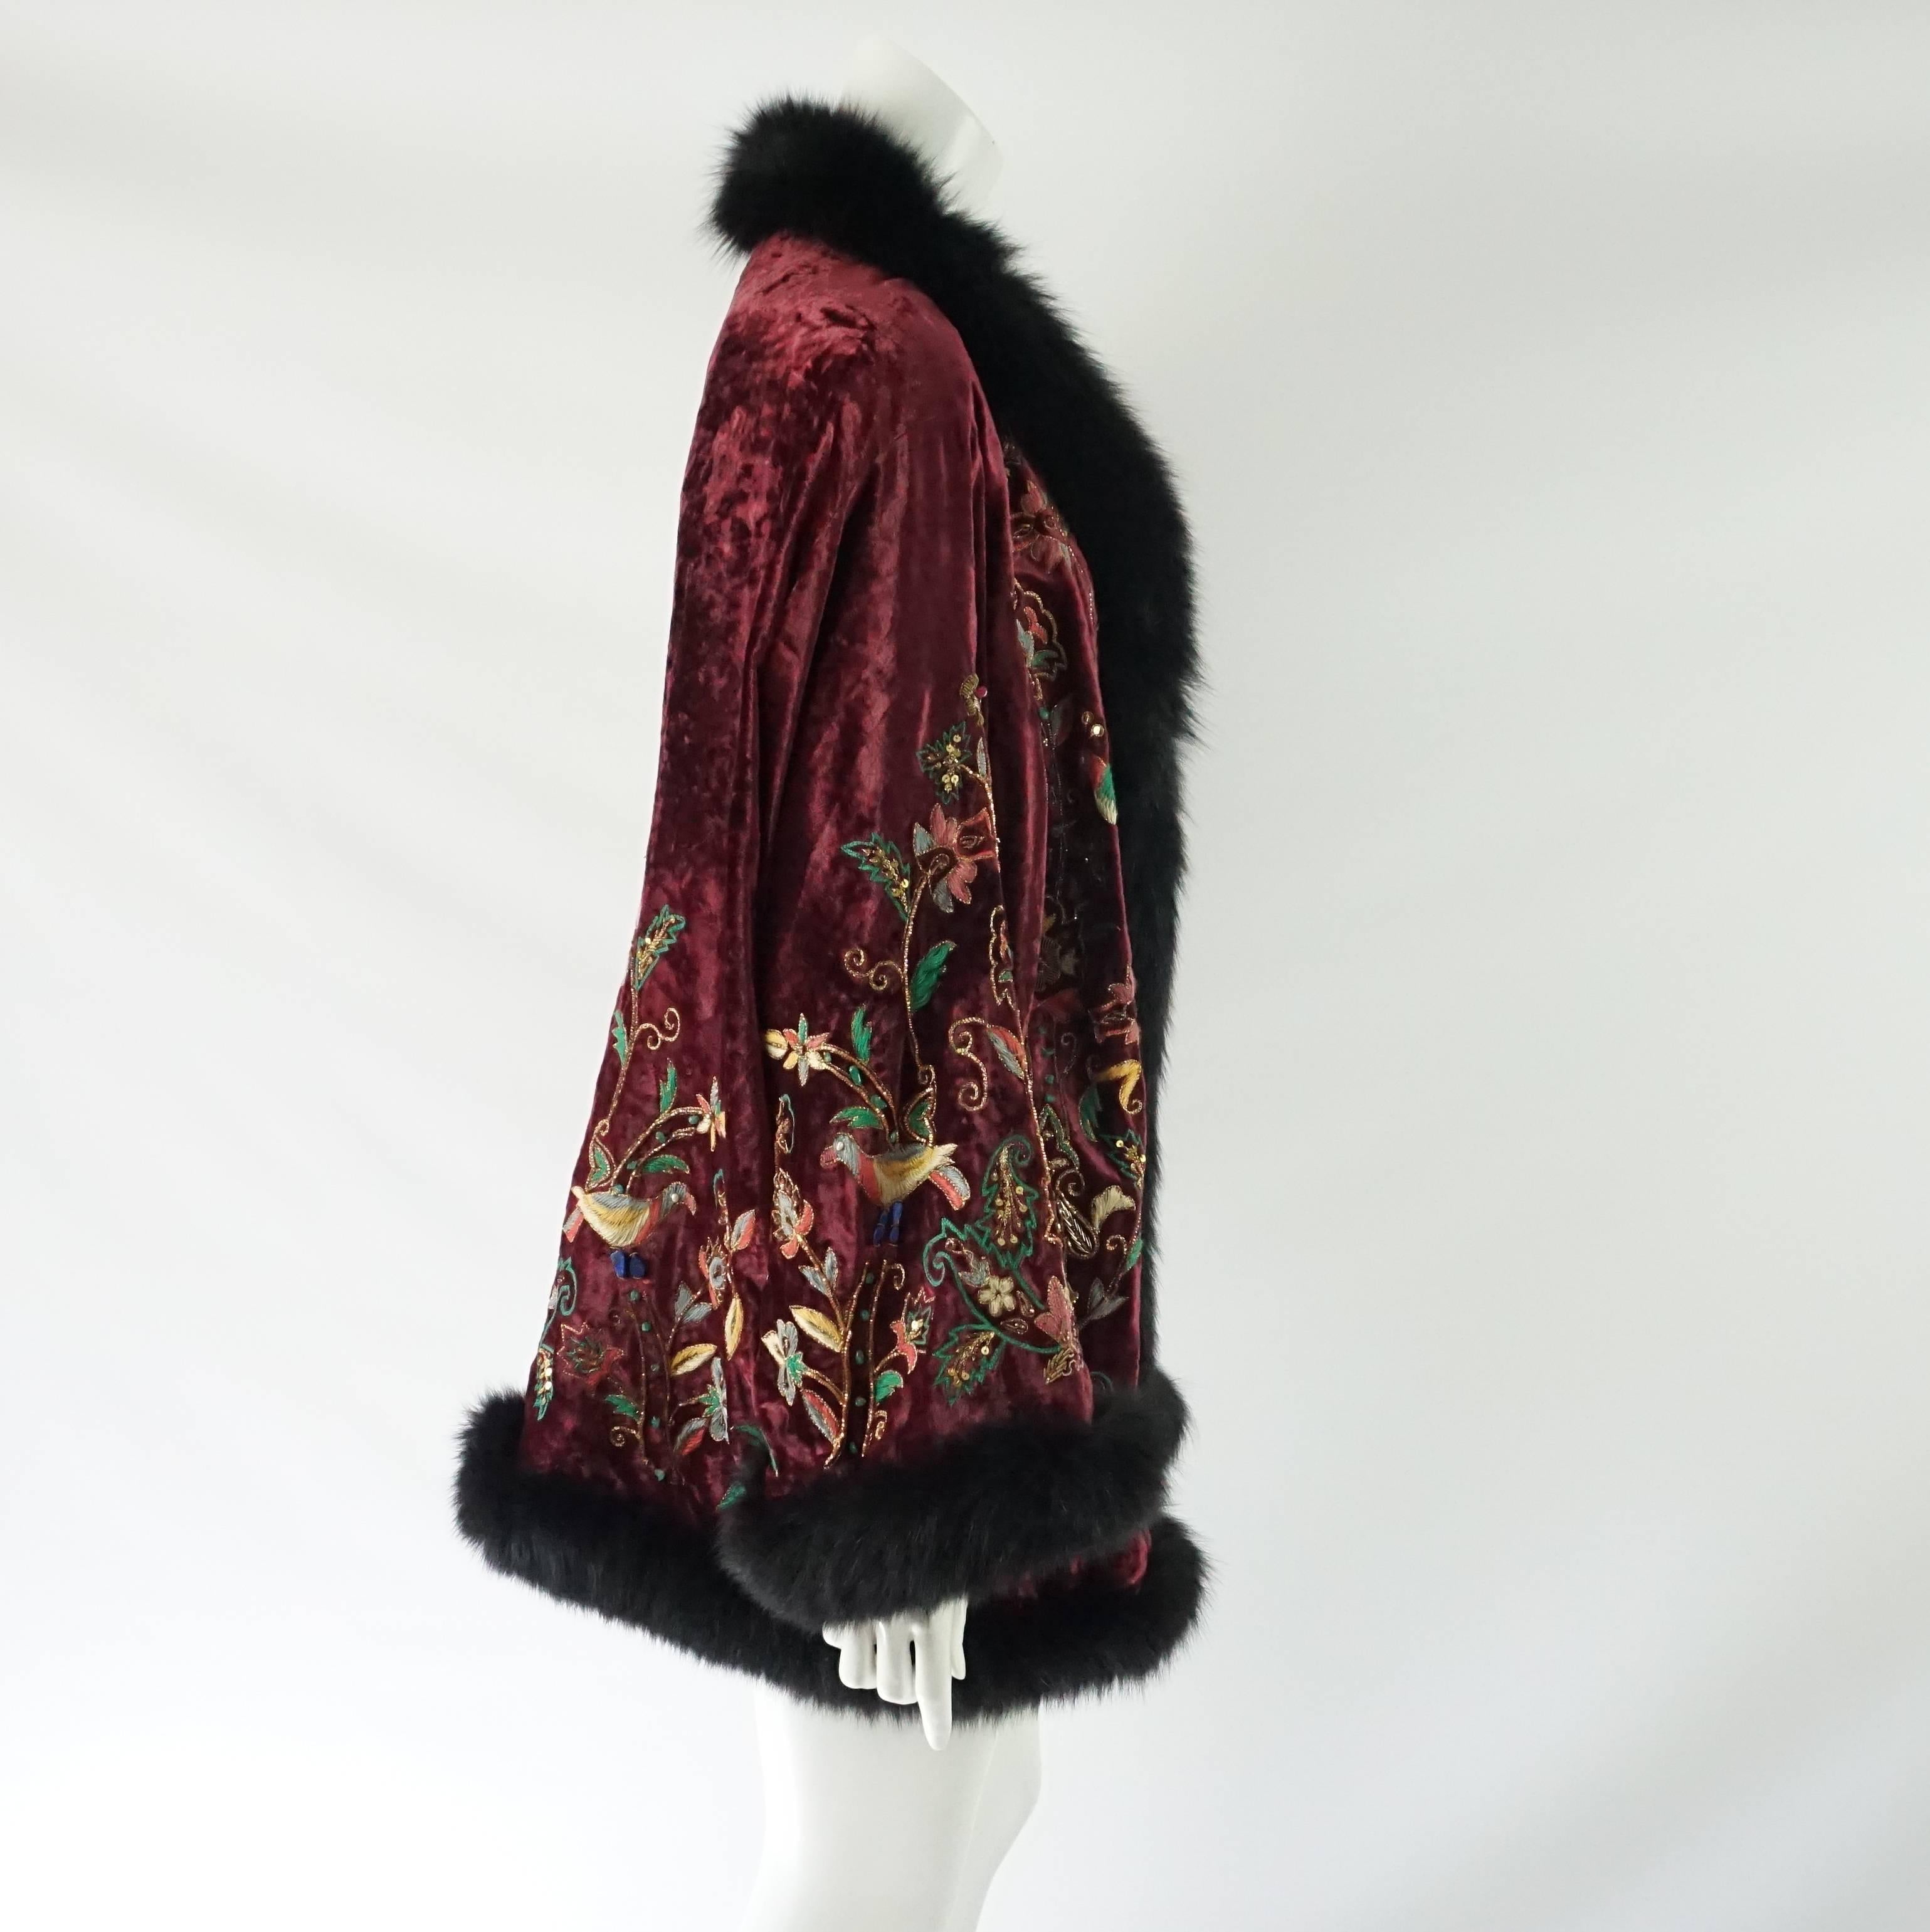 This luxurious Adrienne Landau cape is made of red velvet and has a fox fur trim. There is intricate embroidery in multiple colors throughout the coat. This piece is in excellent condition with minor wear. 

Measurements
Shoulder to Shoulder: